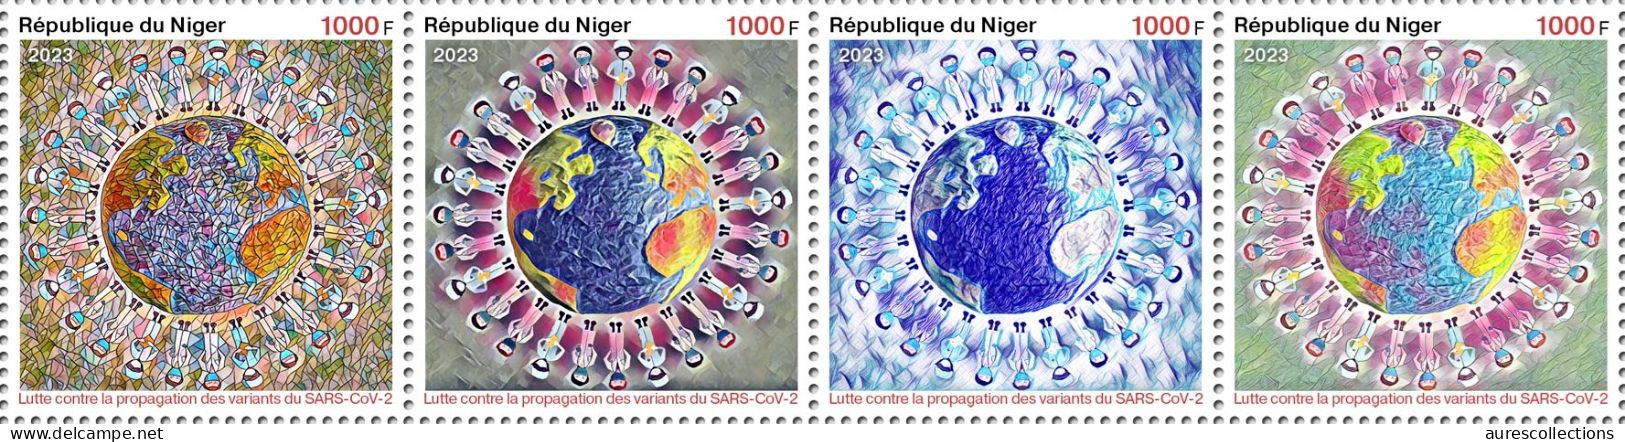 NIGER 2023 - STRIP 4V - COVID-19 PANDEMIC VARIANTS OF SARS - JOINT ISSUE - MNH - Joint Issues